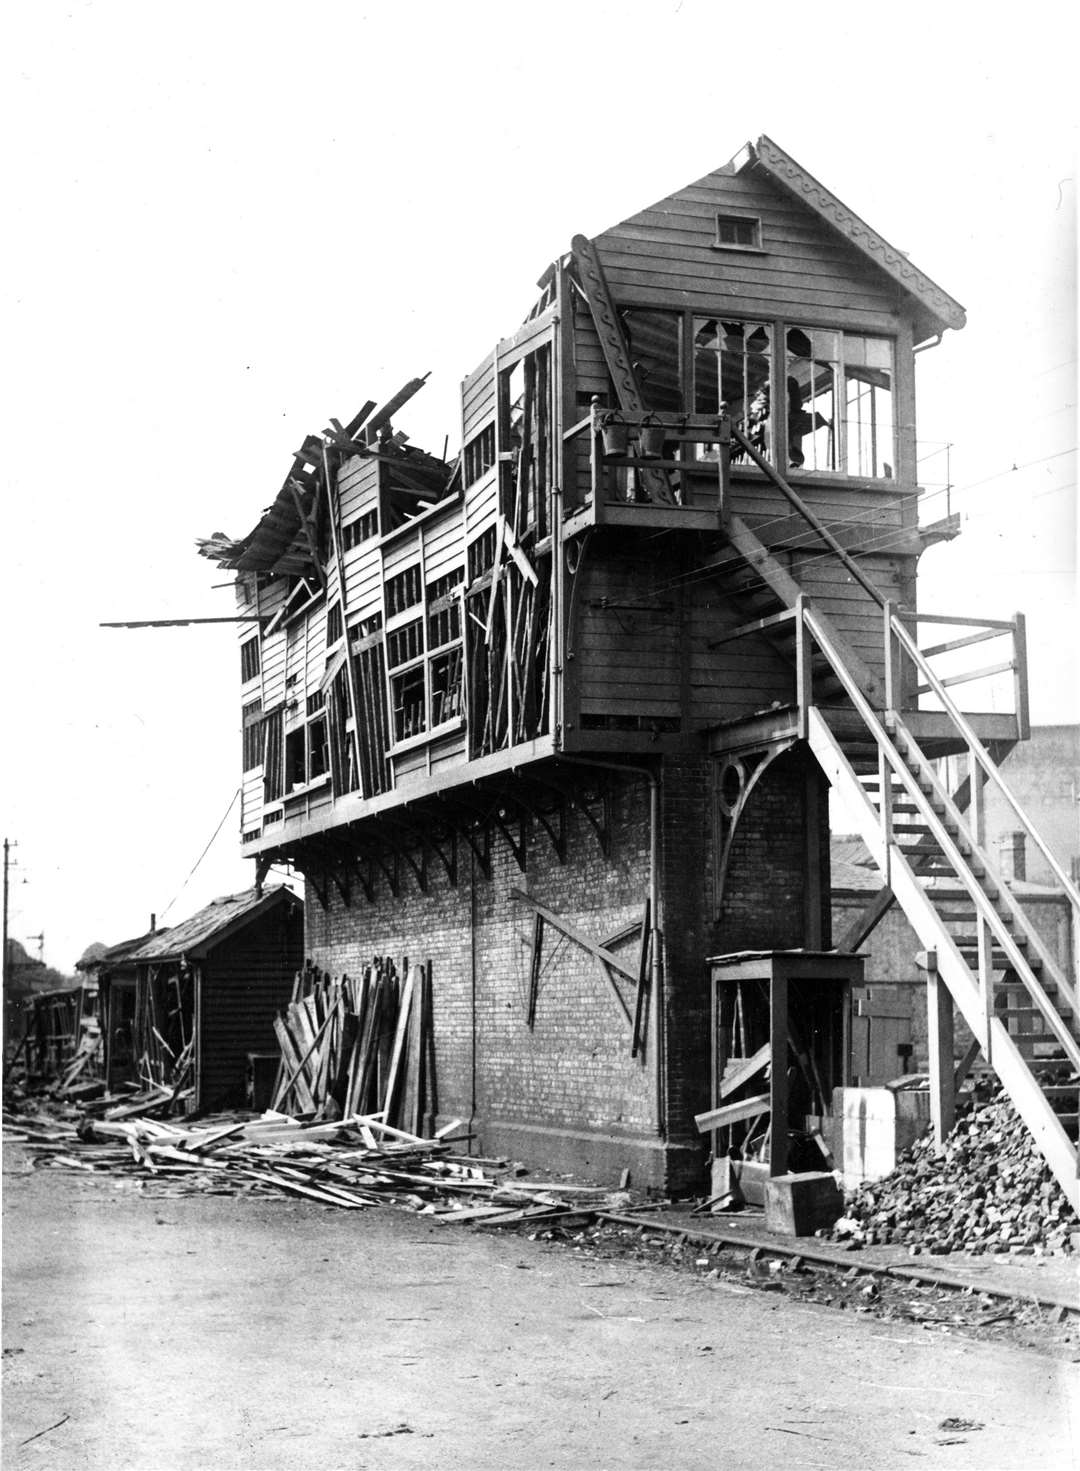 The signal box at Maidstone West station all but totally wrecked after being hit by a V1. 3 August 1944. (13247705)